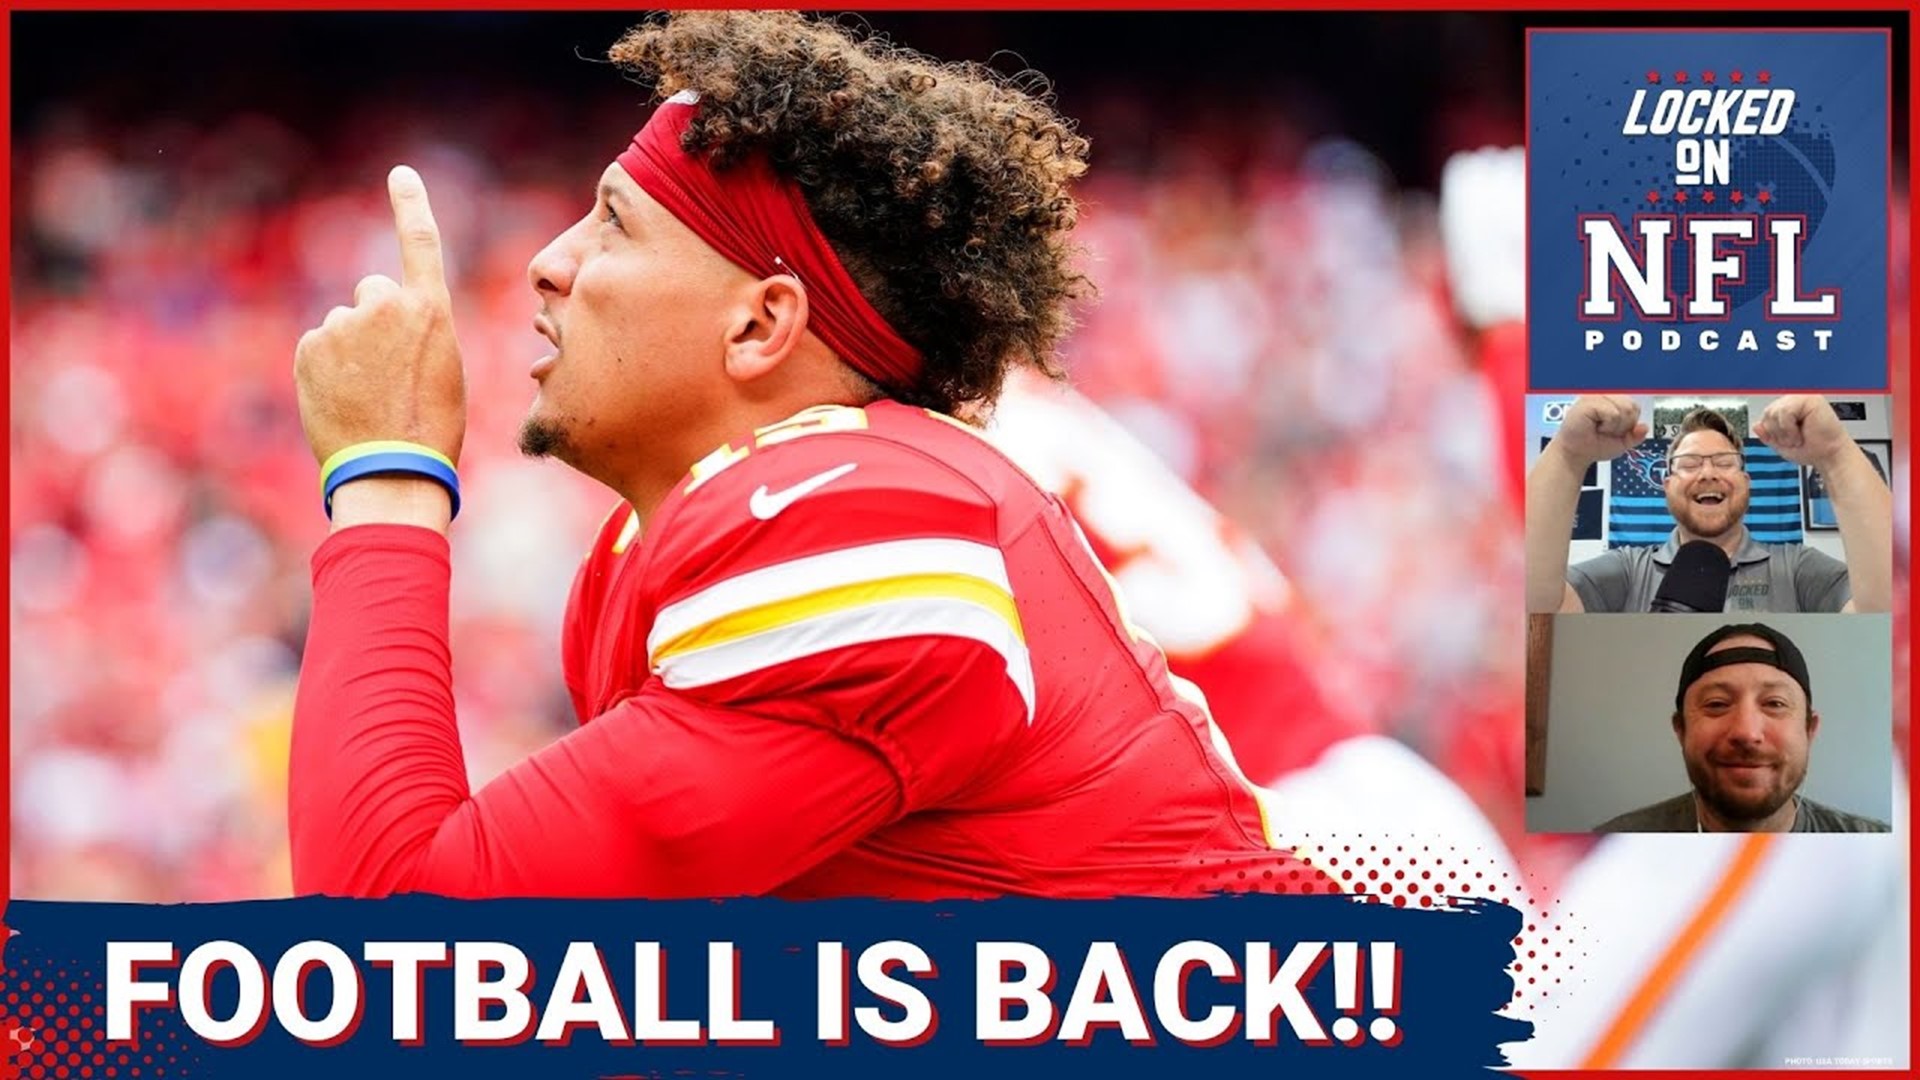 THE NFL IS BACK!!! The Kansas City Chiefs take on the Detroit Lions to open the season. Can the Chiefs win without Travis Kelce and Chris Jones?